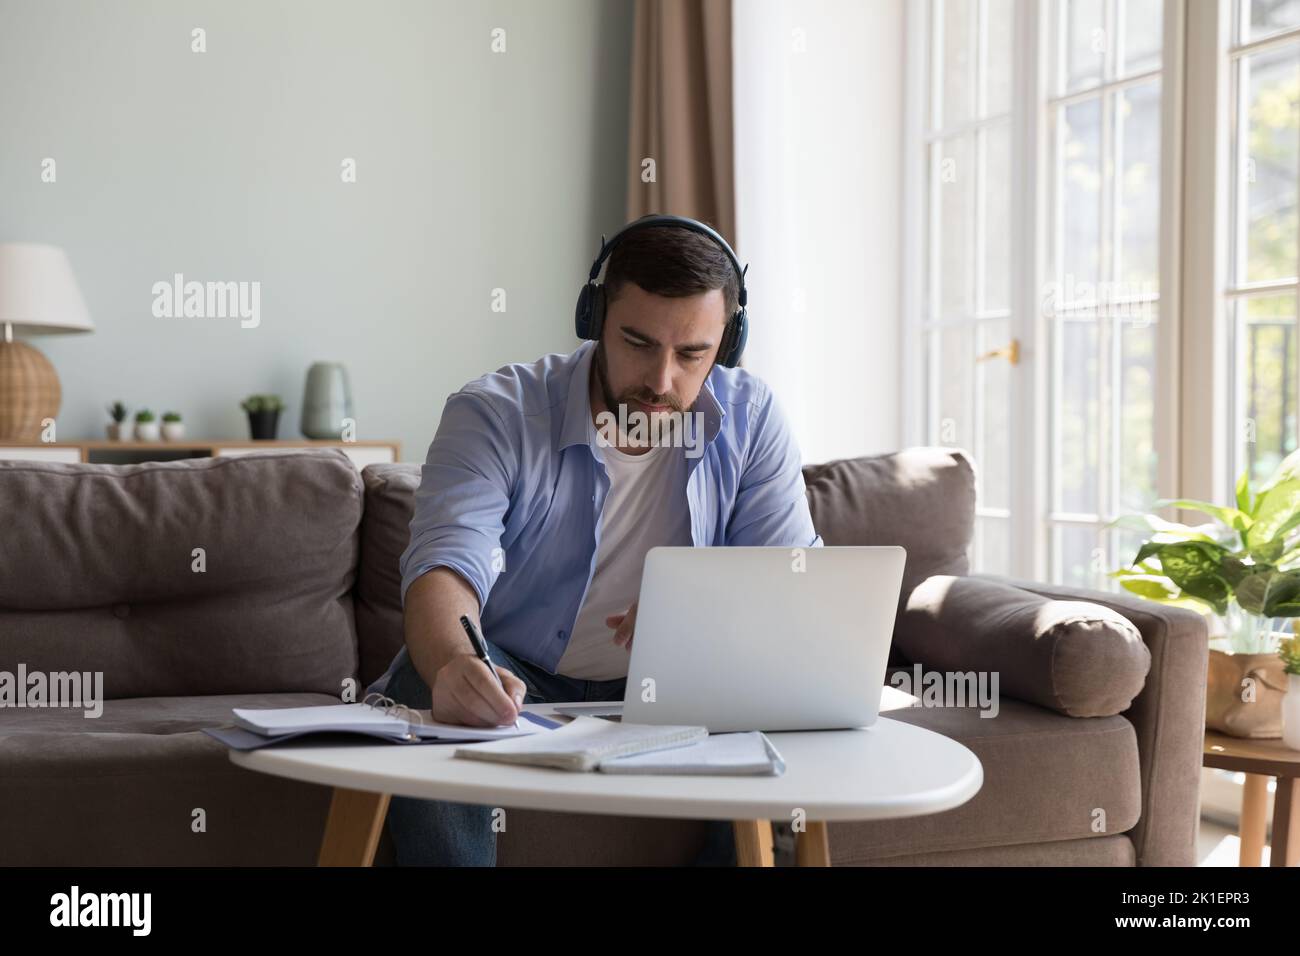 Concentrated millennial adult student man in wireless headphones studying online Stock Photo